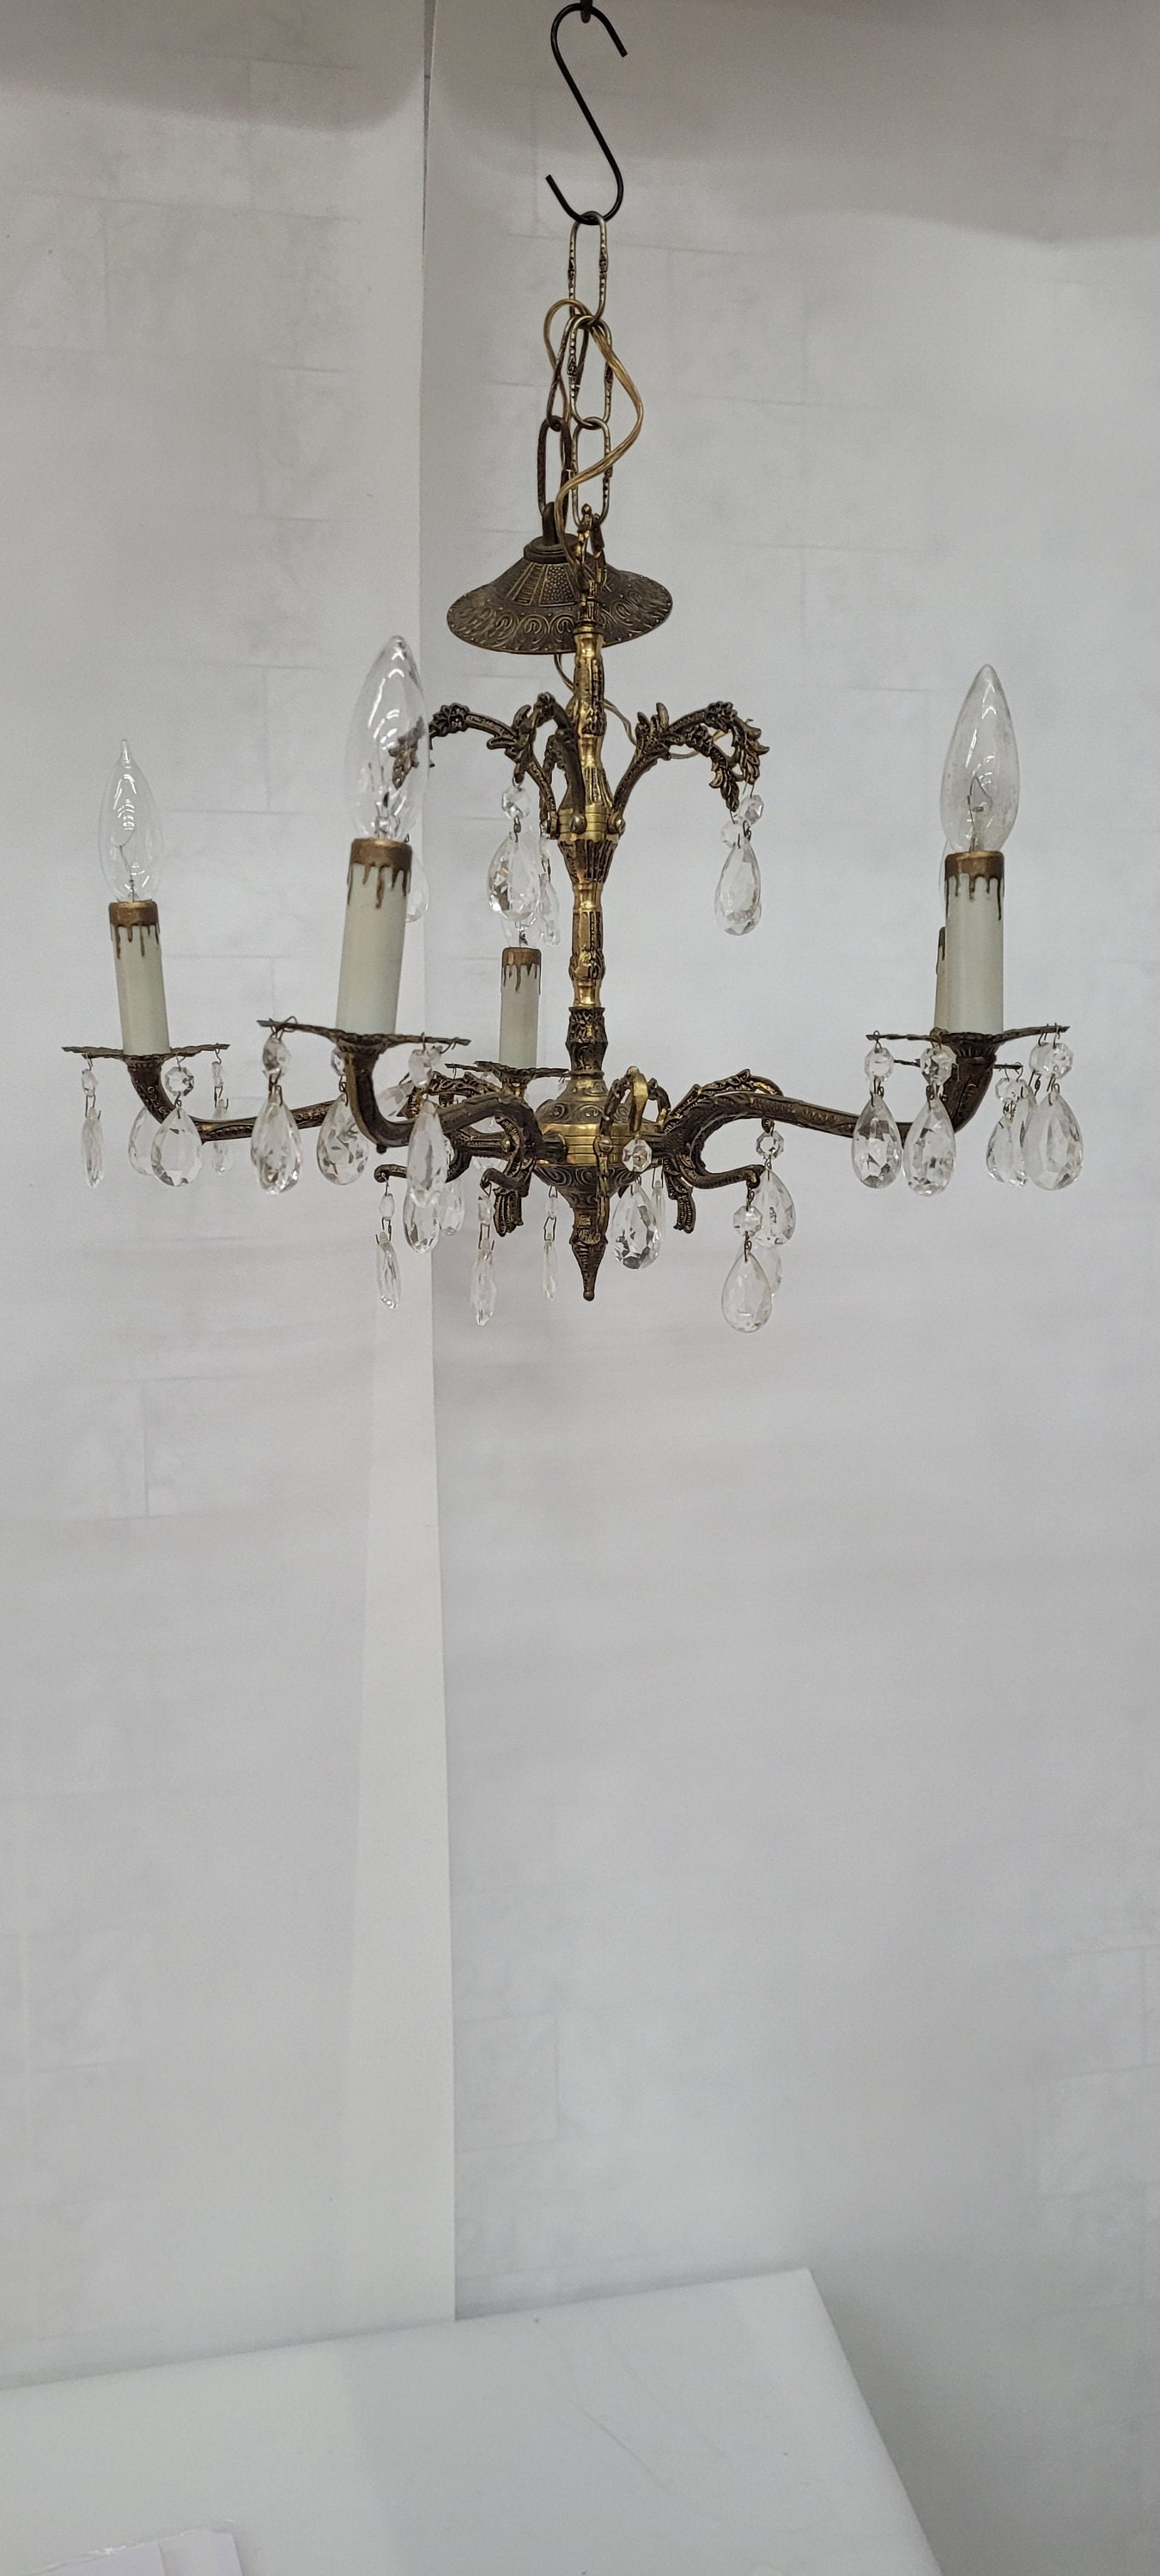 5 Light Armed Fitting Antique Brass Crystal